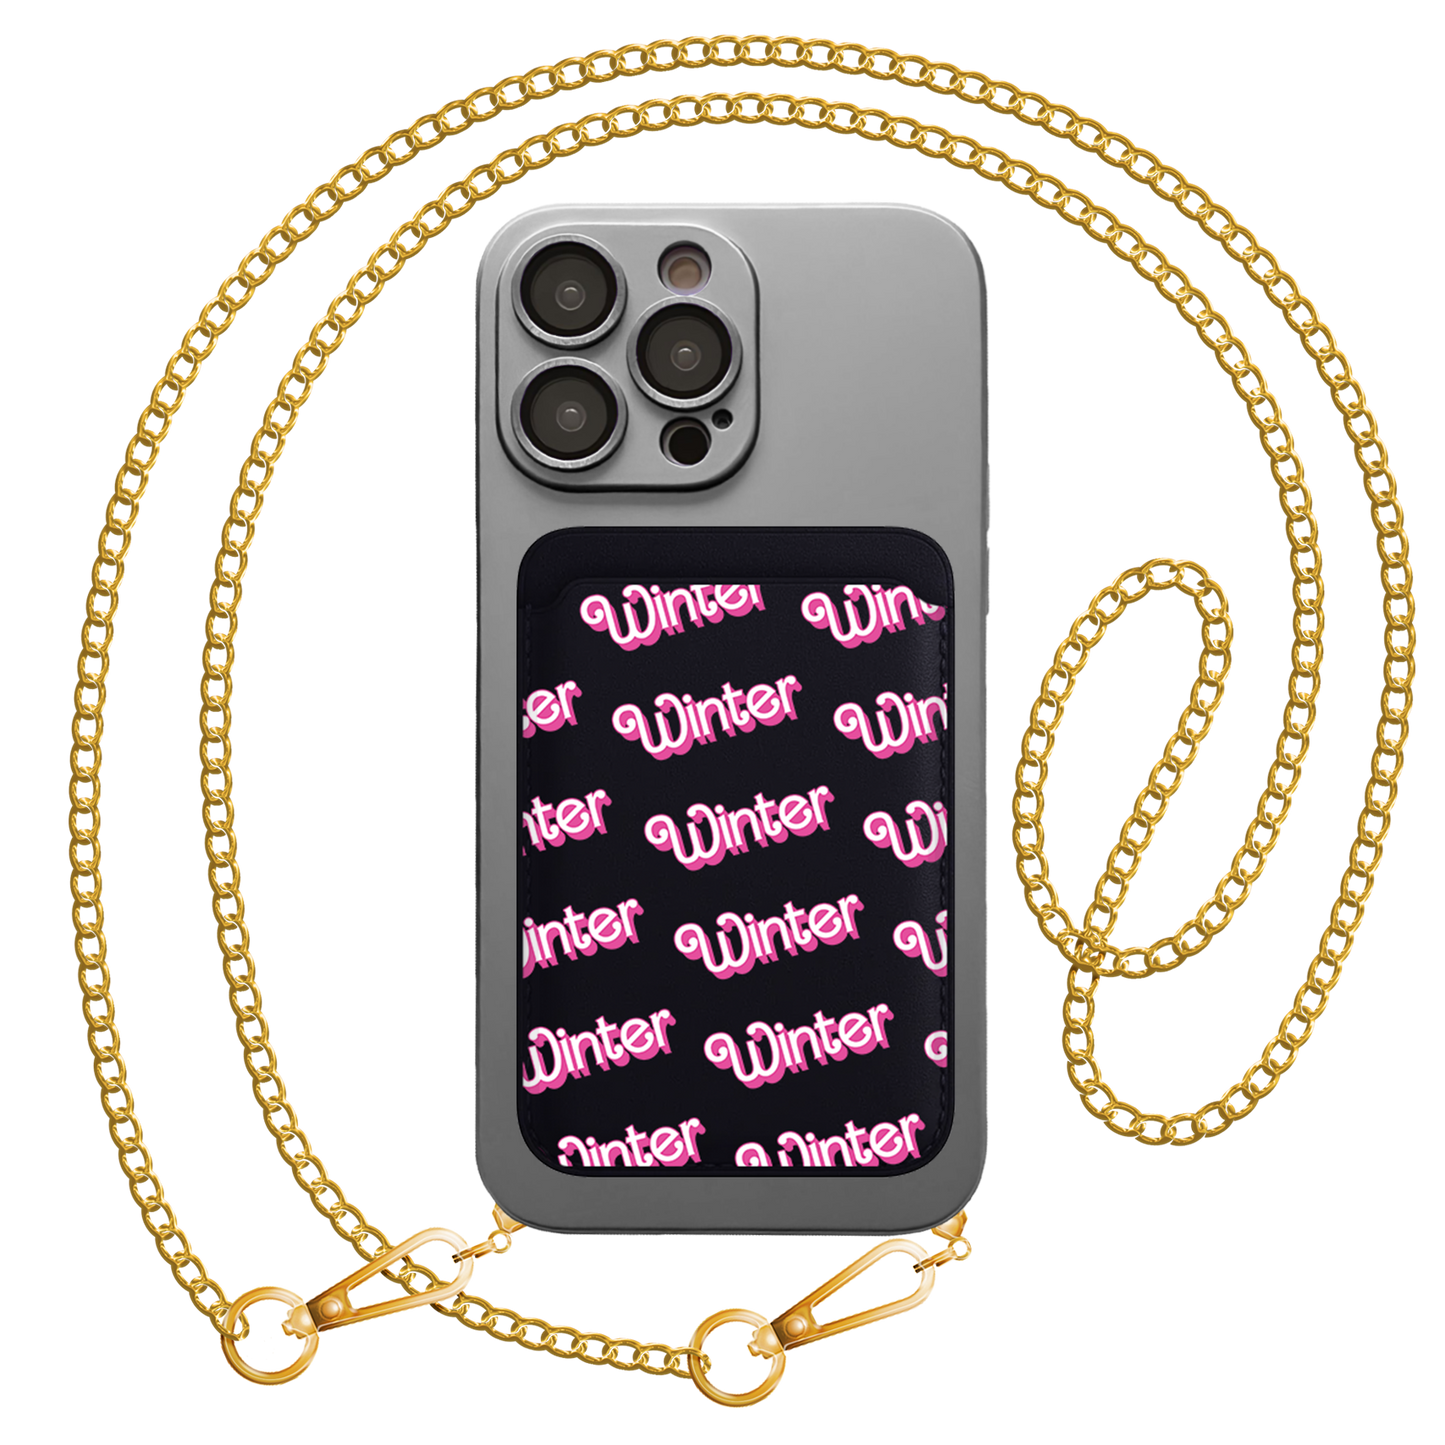 iPhone Magnetic Wallet Silicone Case - Barbie Monogram